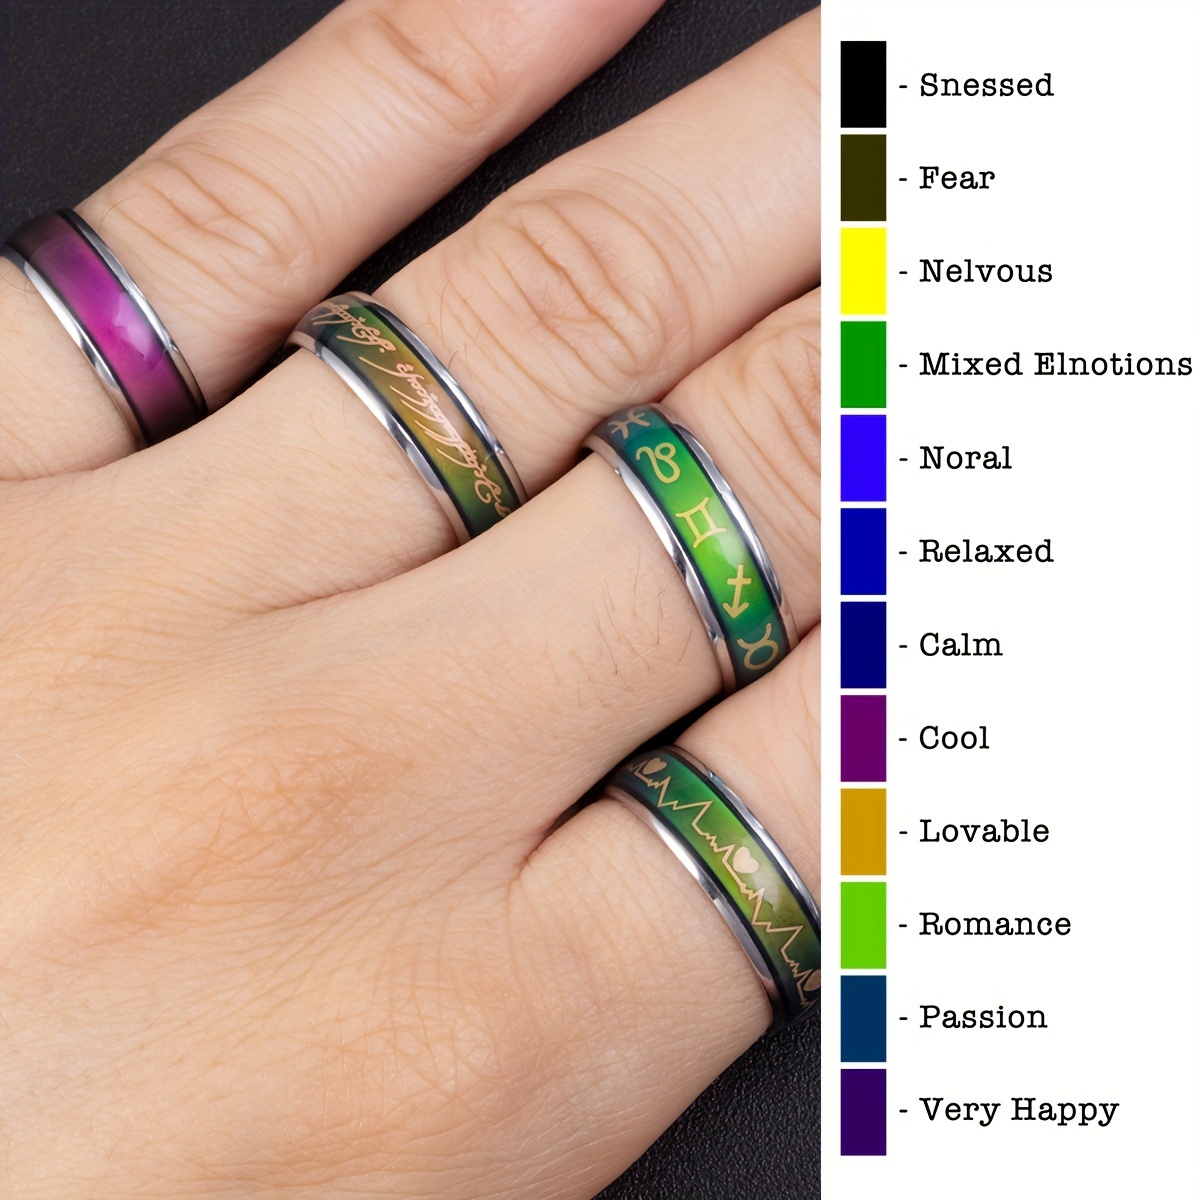 Unisex Stainless Steel Ring Wide 8mm Gradual Color Changing Mood Rings  Feeling/Emotion Couple Temperature Ring Jewelry